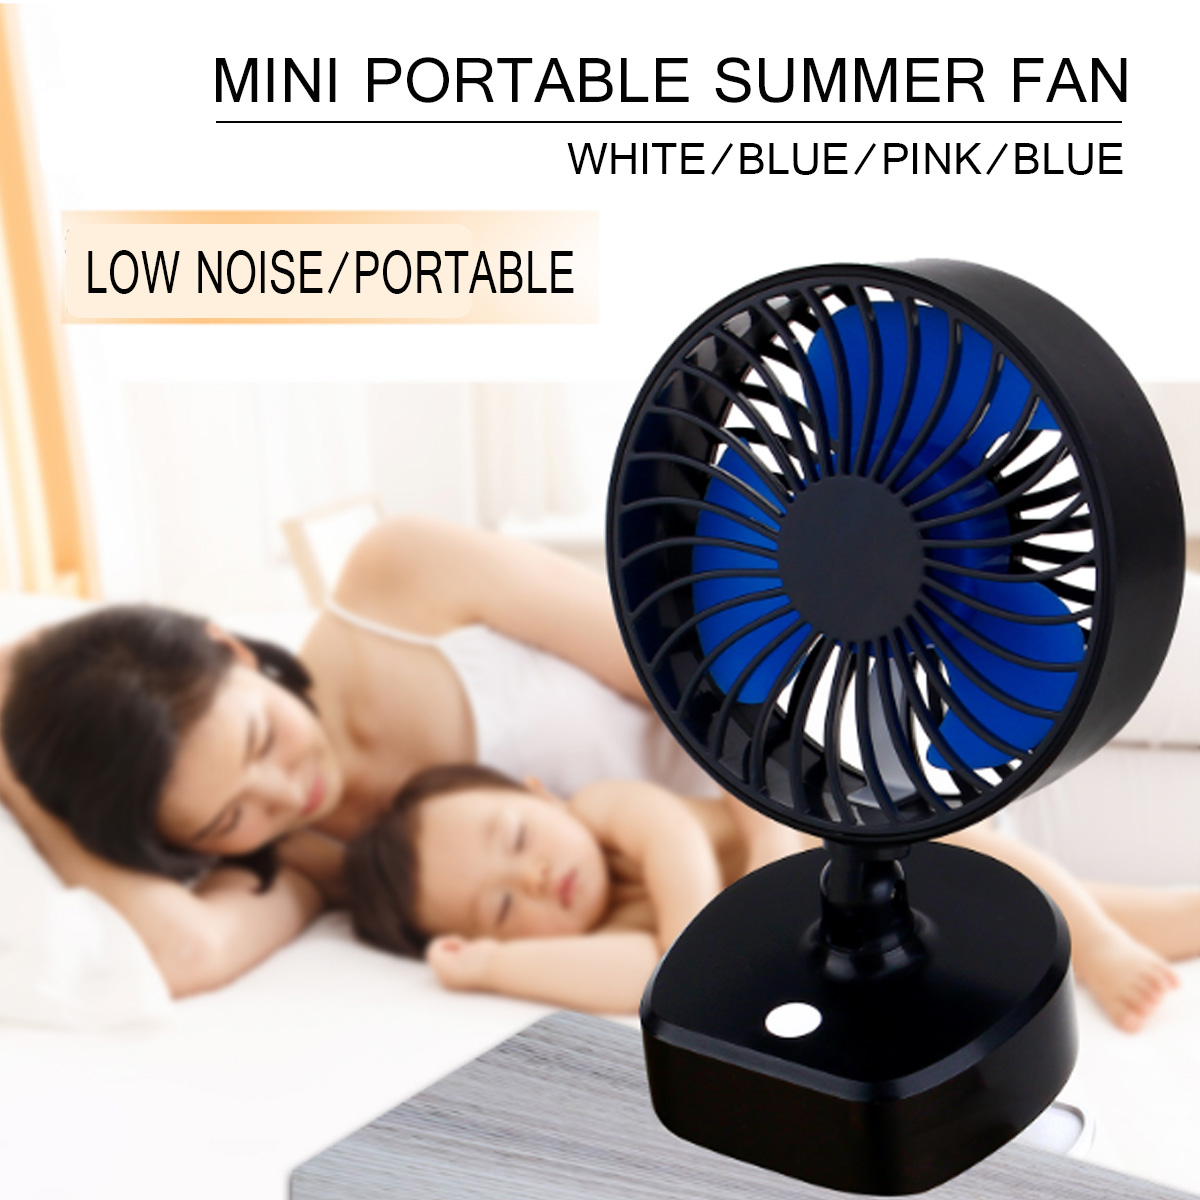 3Modes-Mini-Portable-Summer-Fan-Outdoor-Camping-USB-Rrchargeable-Desk-Fan-with-Safety-Clip-1526868-1